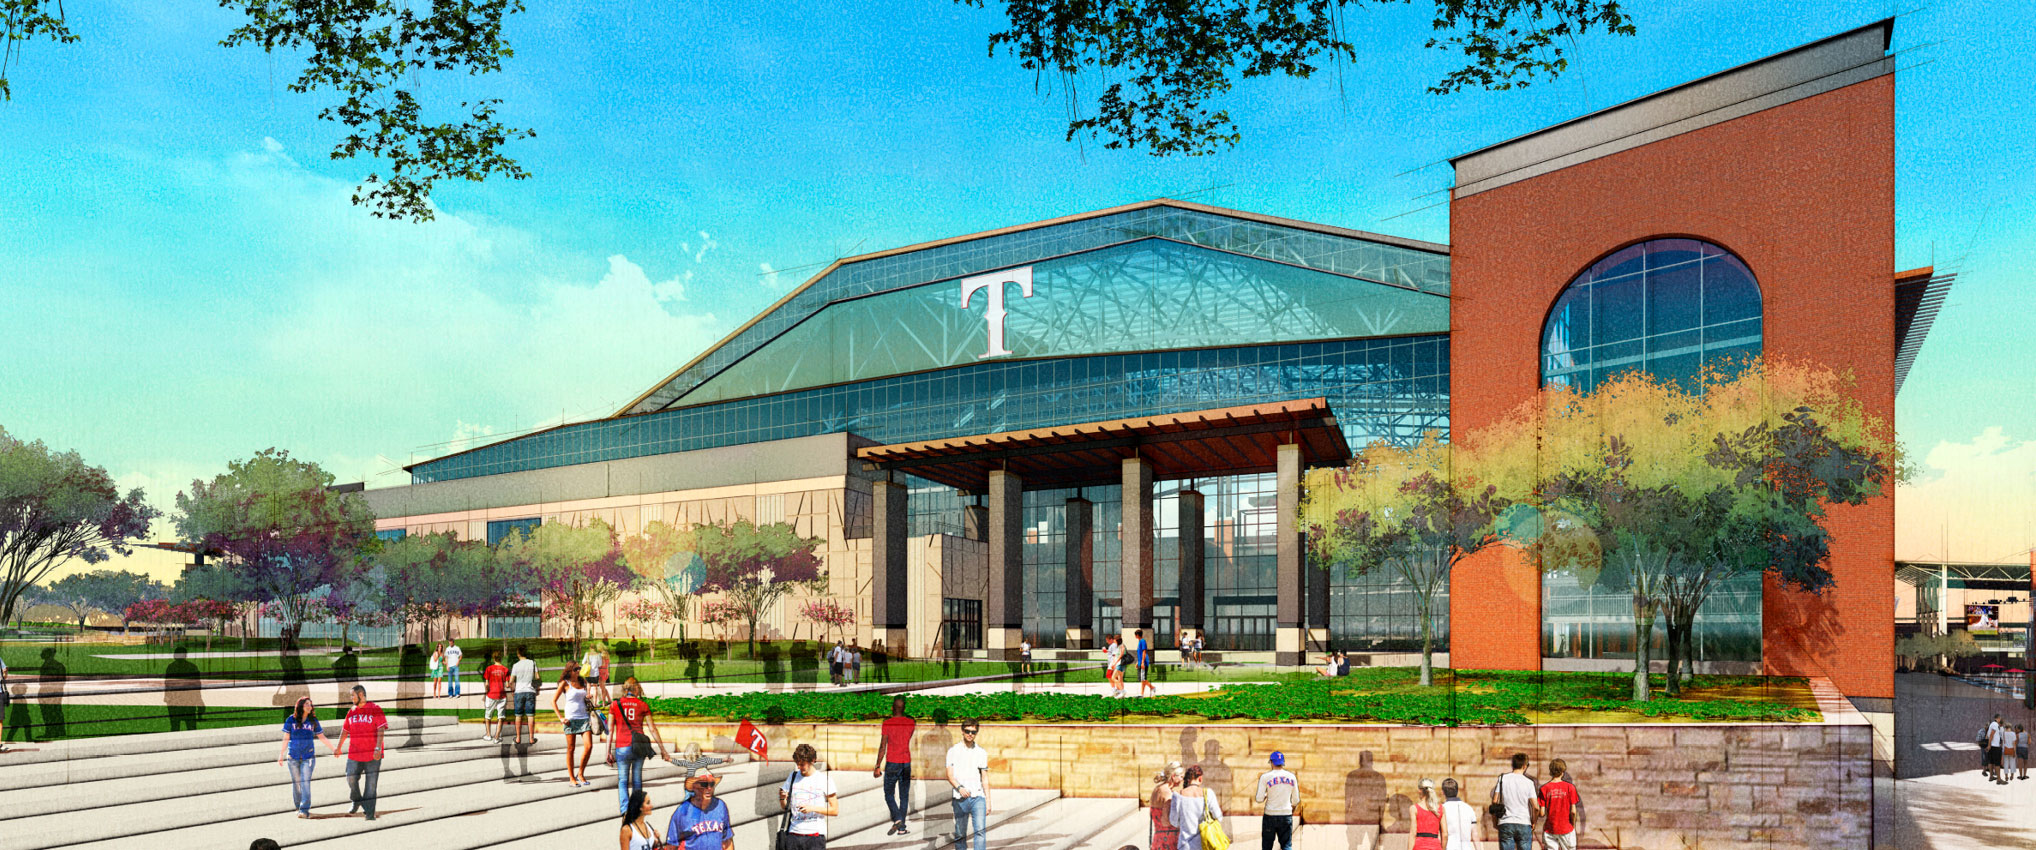 New Home of Texas Rangers Has Climate-Controlling Retractable Roof